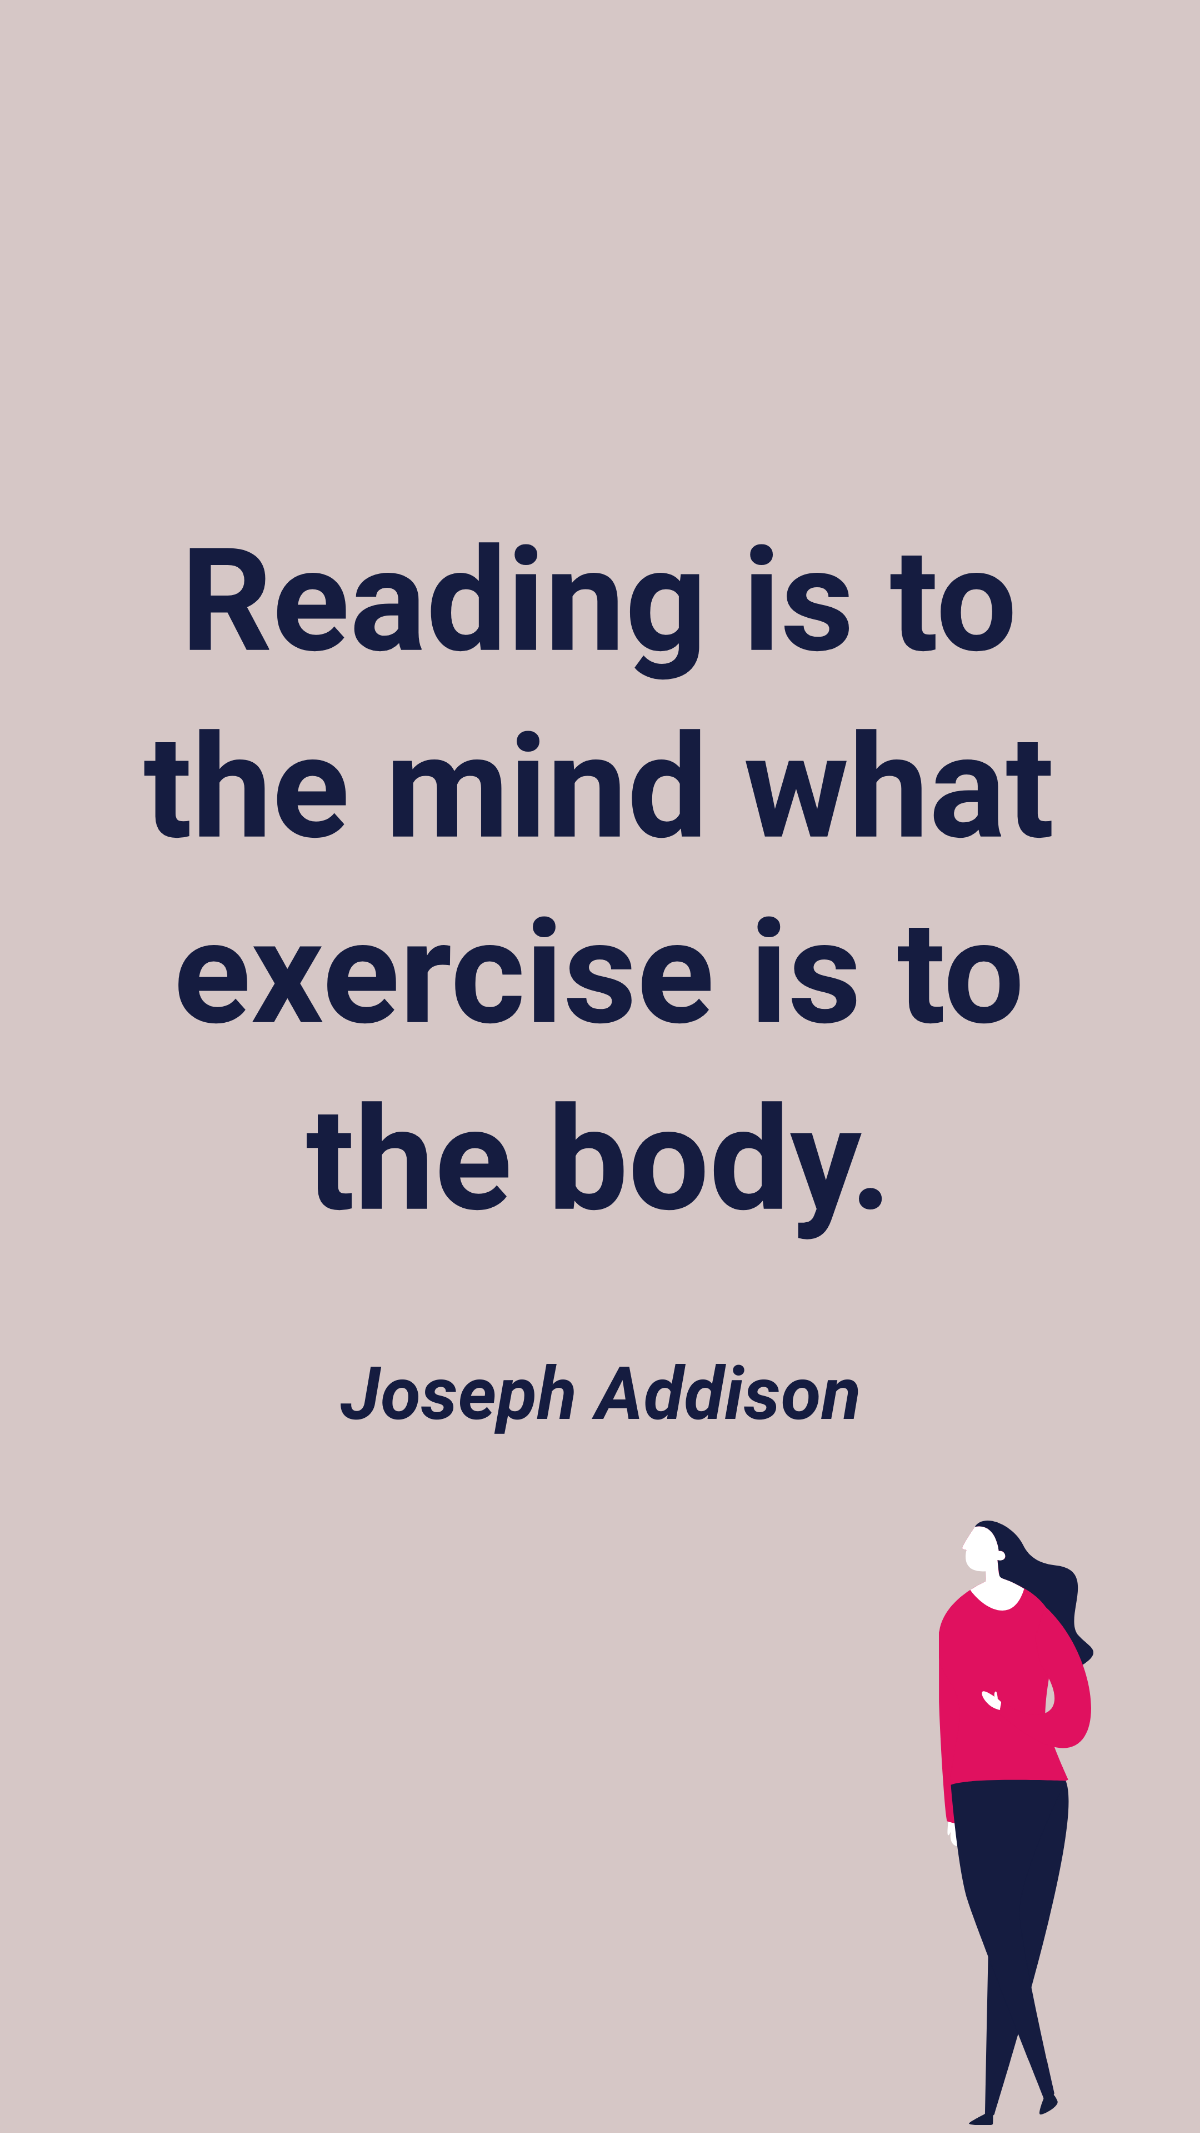 Joseph Addison - Reading is to the mind what exercise is to the body. Template